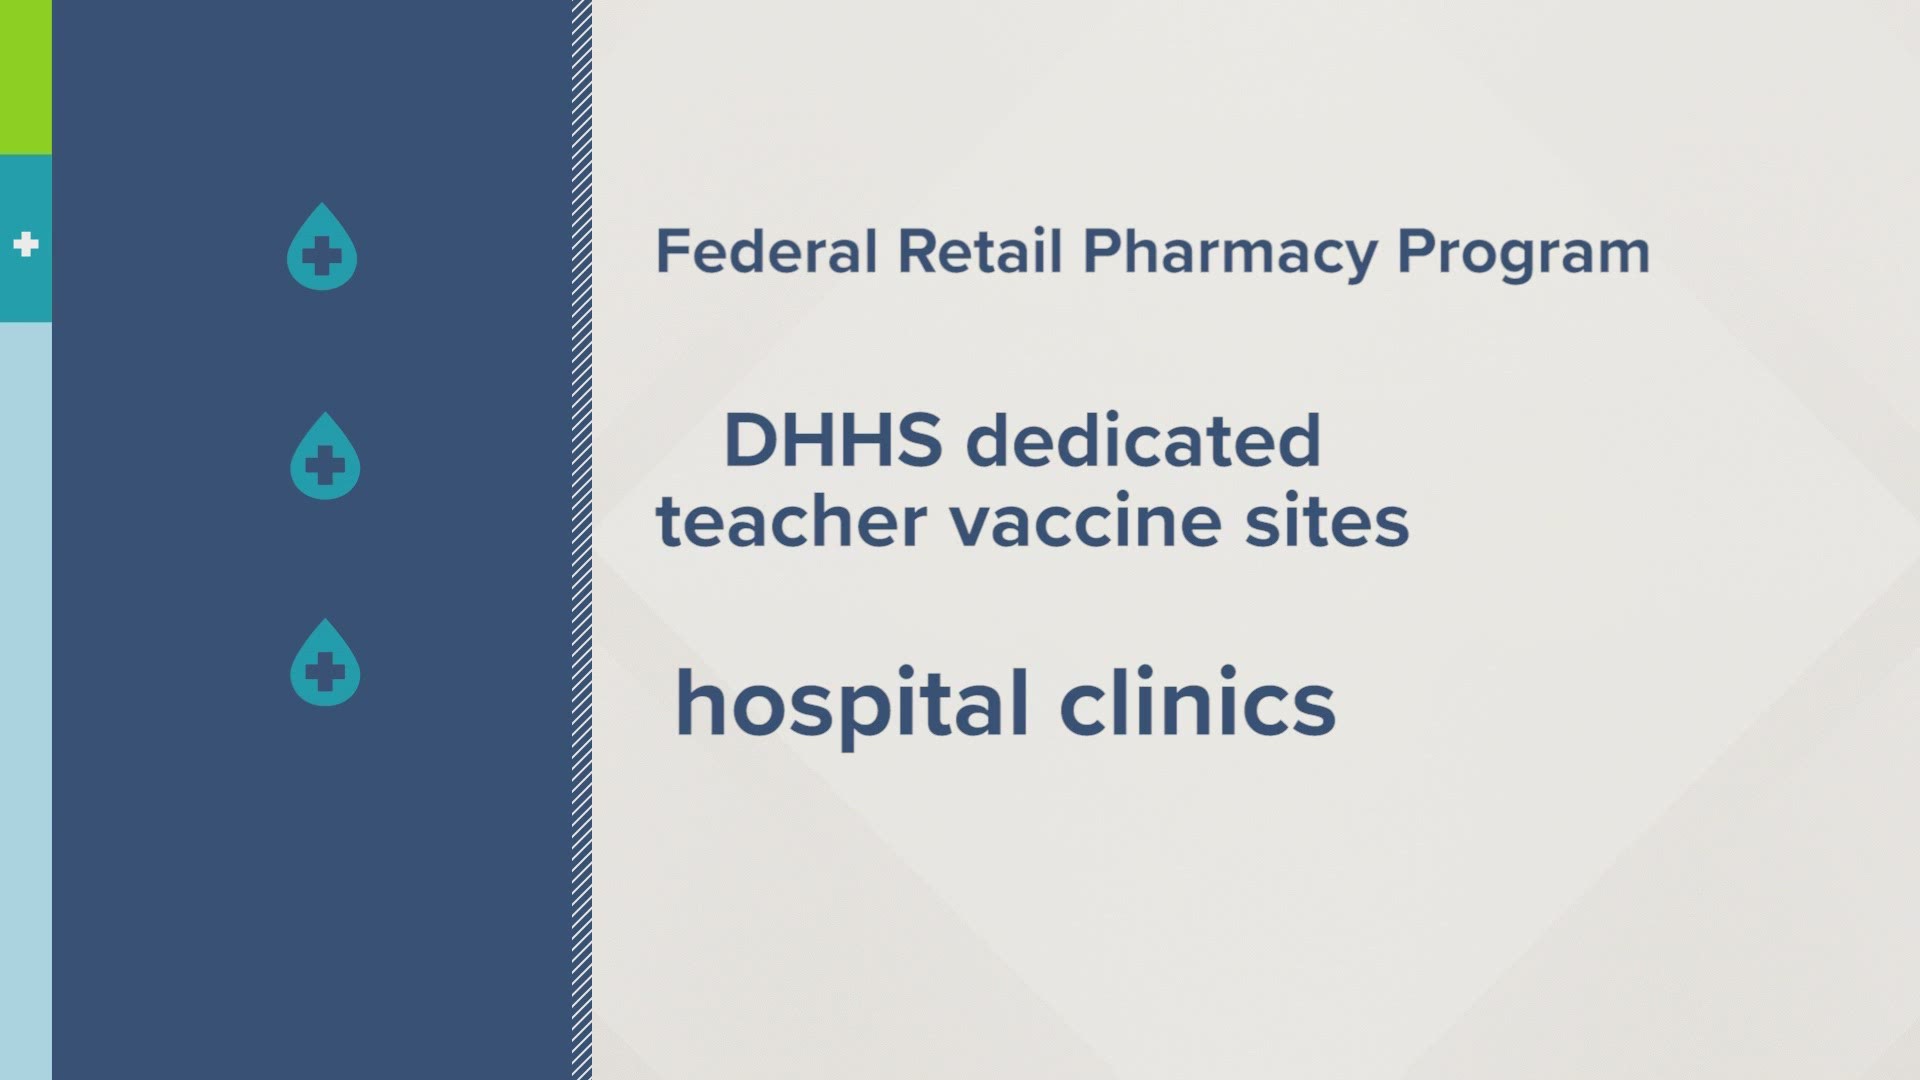 Options include retail pharmacies, dedicated Maine DHHS sites for teachers, and hospital COVID-19 vaccine clinics.